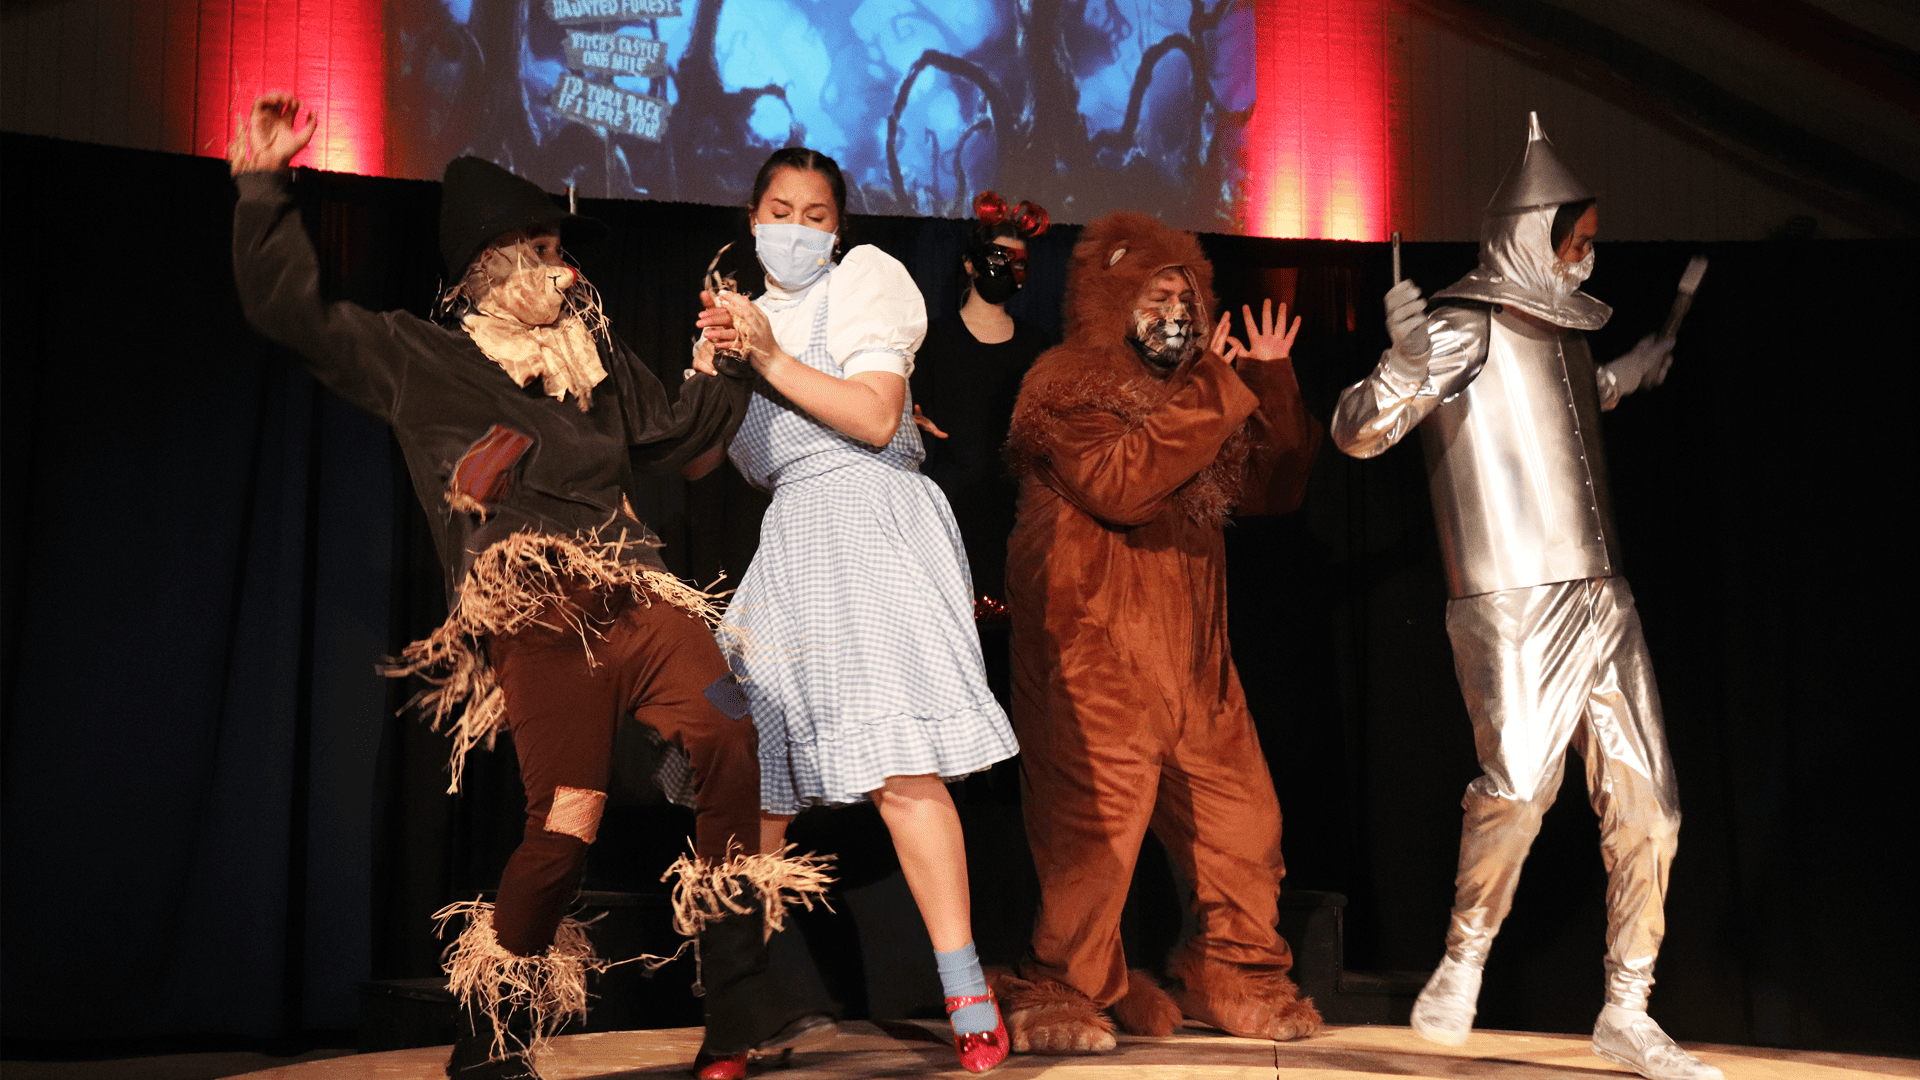 School theater production of the Wizard of OZ